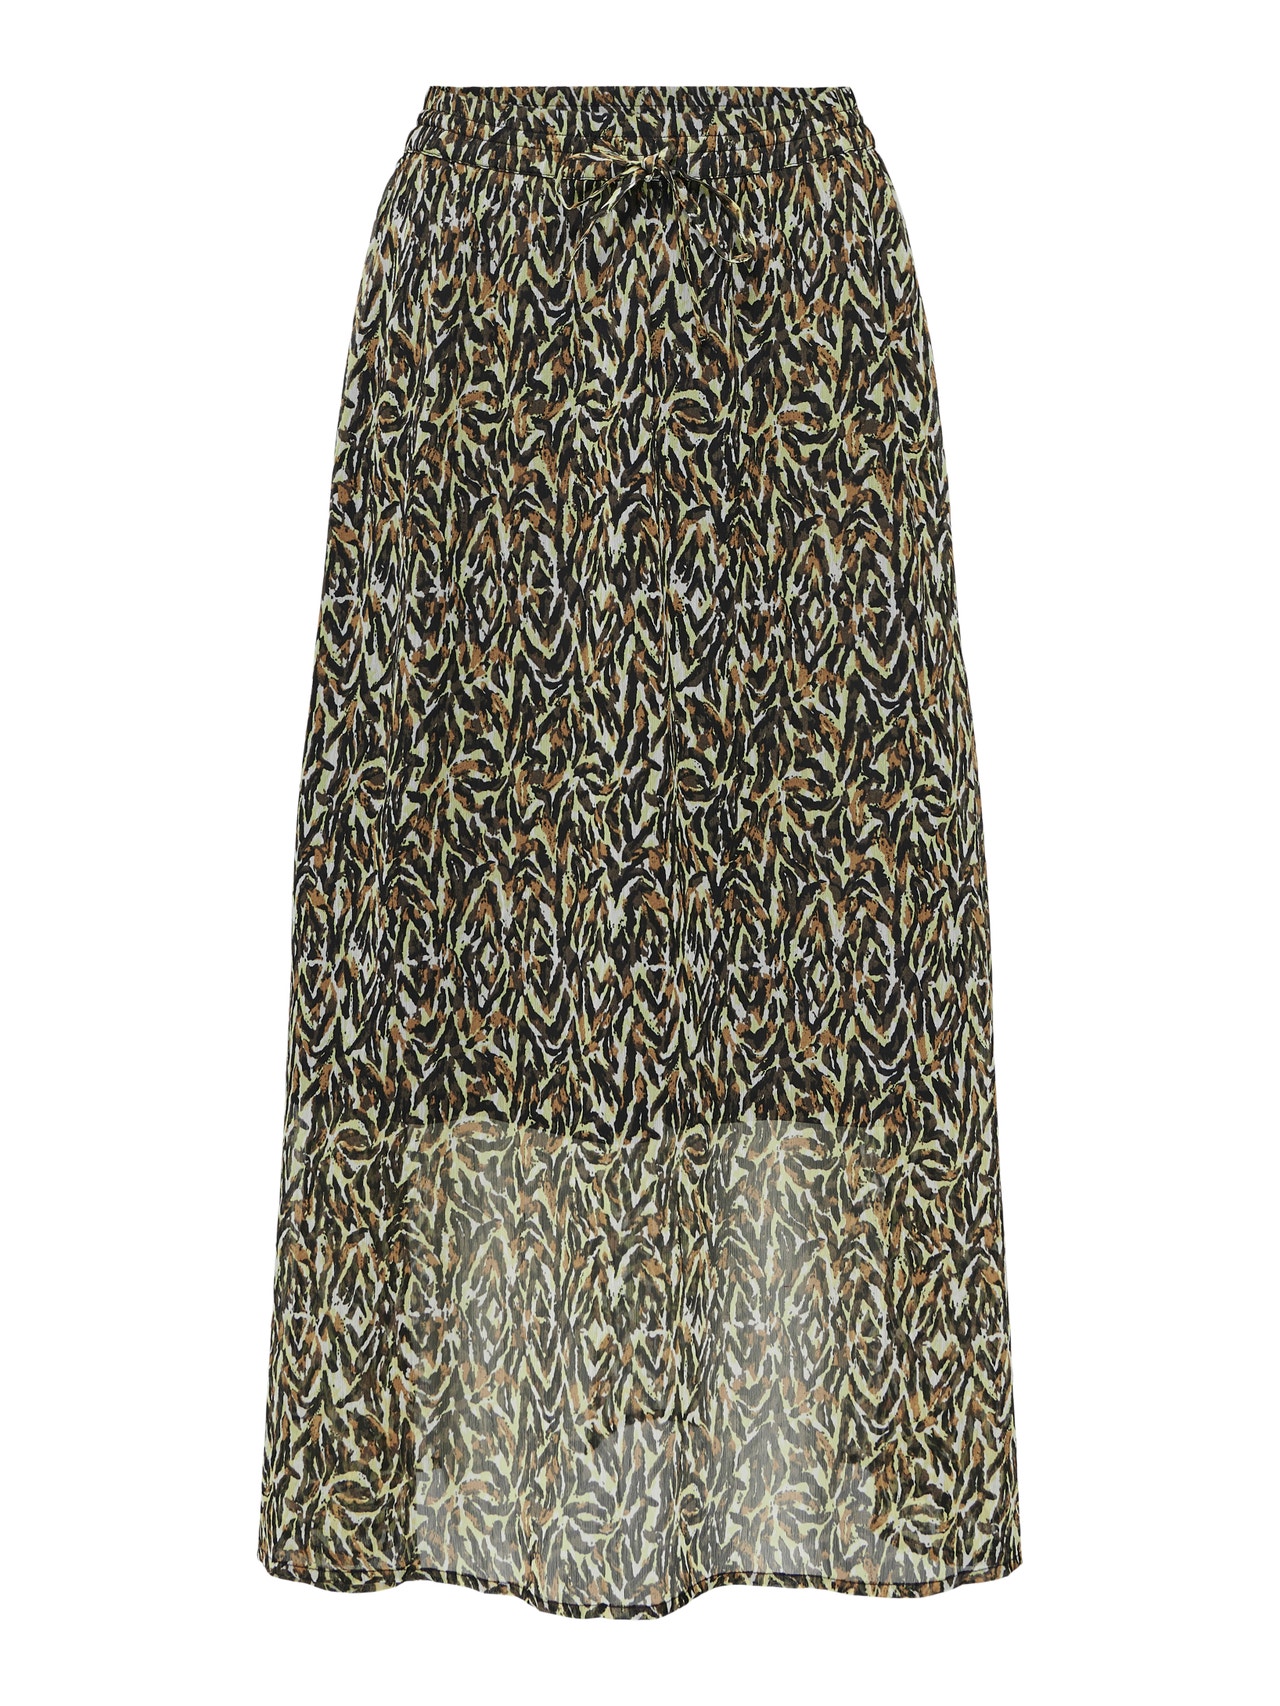 ONLY Long skirt -Toasted Coconut - 15290740